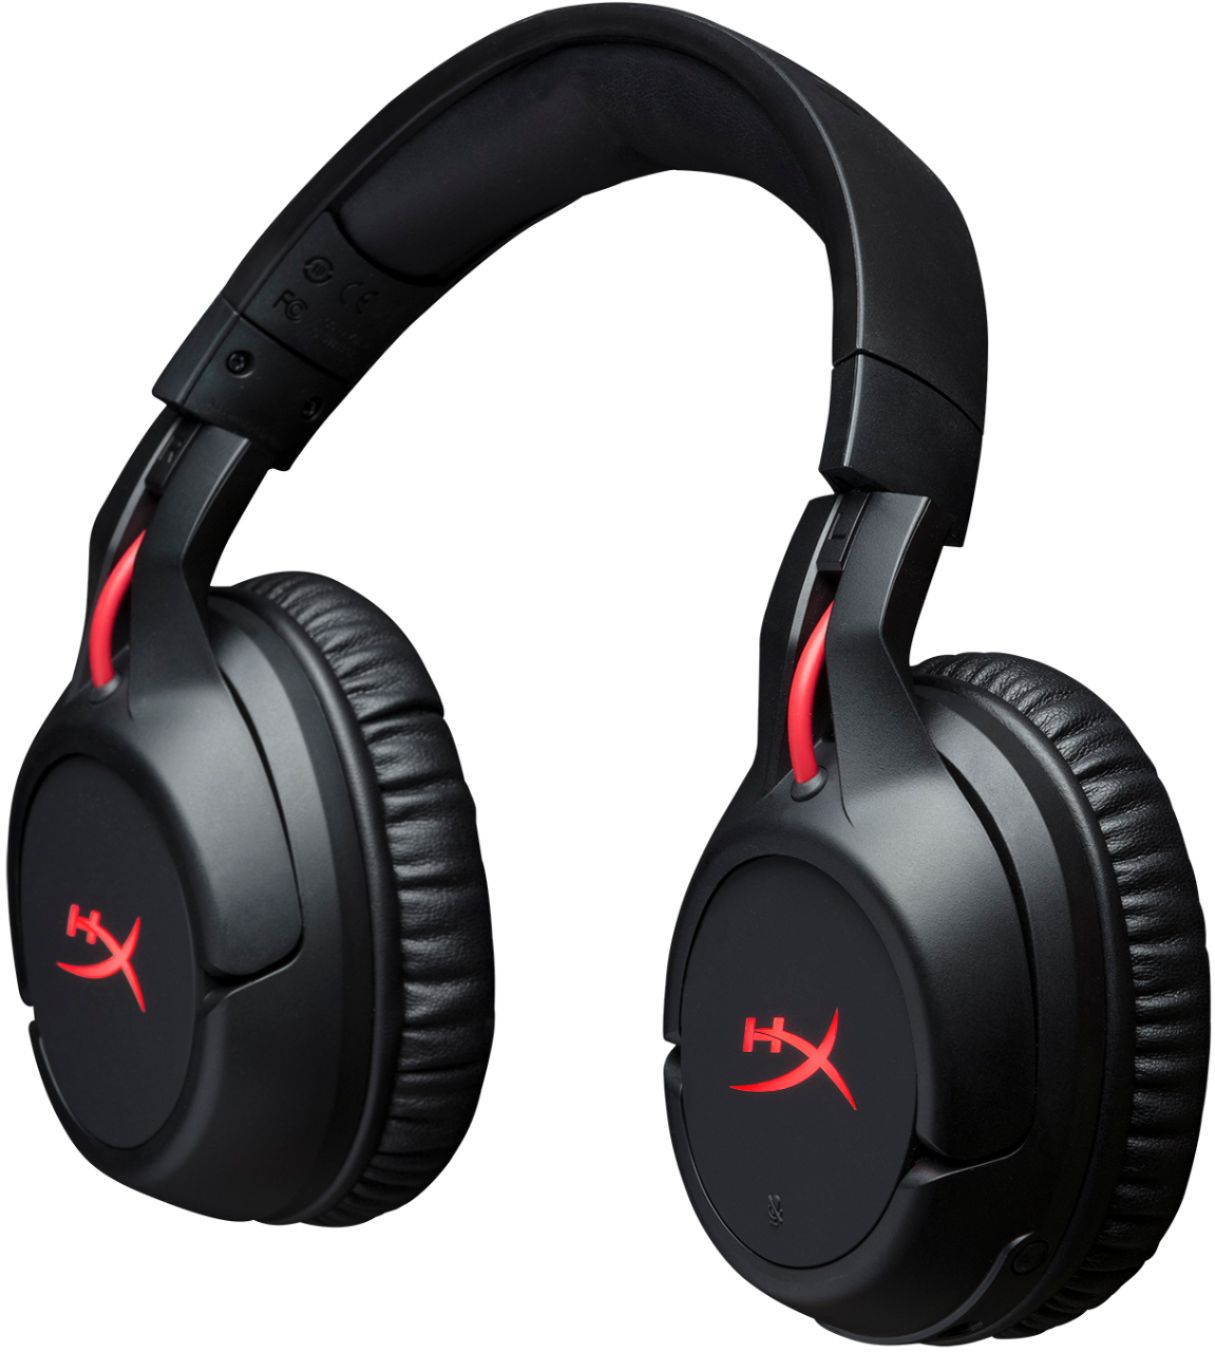 Best PS4 Gaming Flight for 4P5L4AA#ABL/HX-HSCF-BK/AM - and PC, Headset Black Wireless Buy HyperX Cloud PS5,